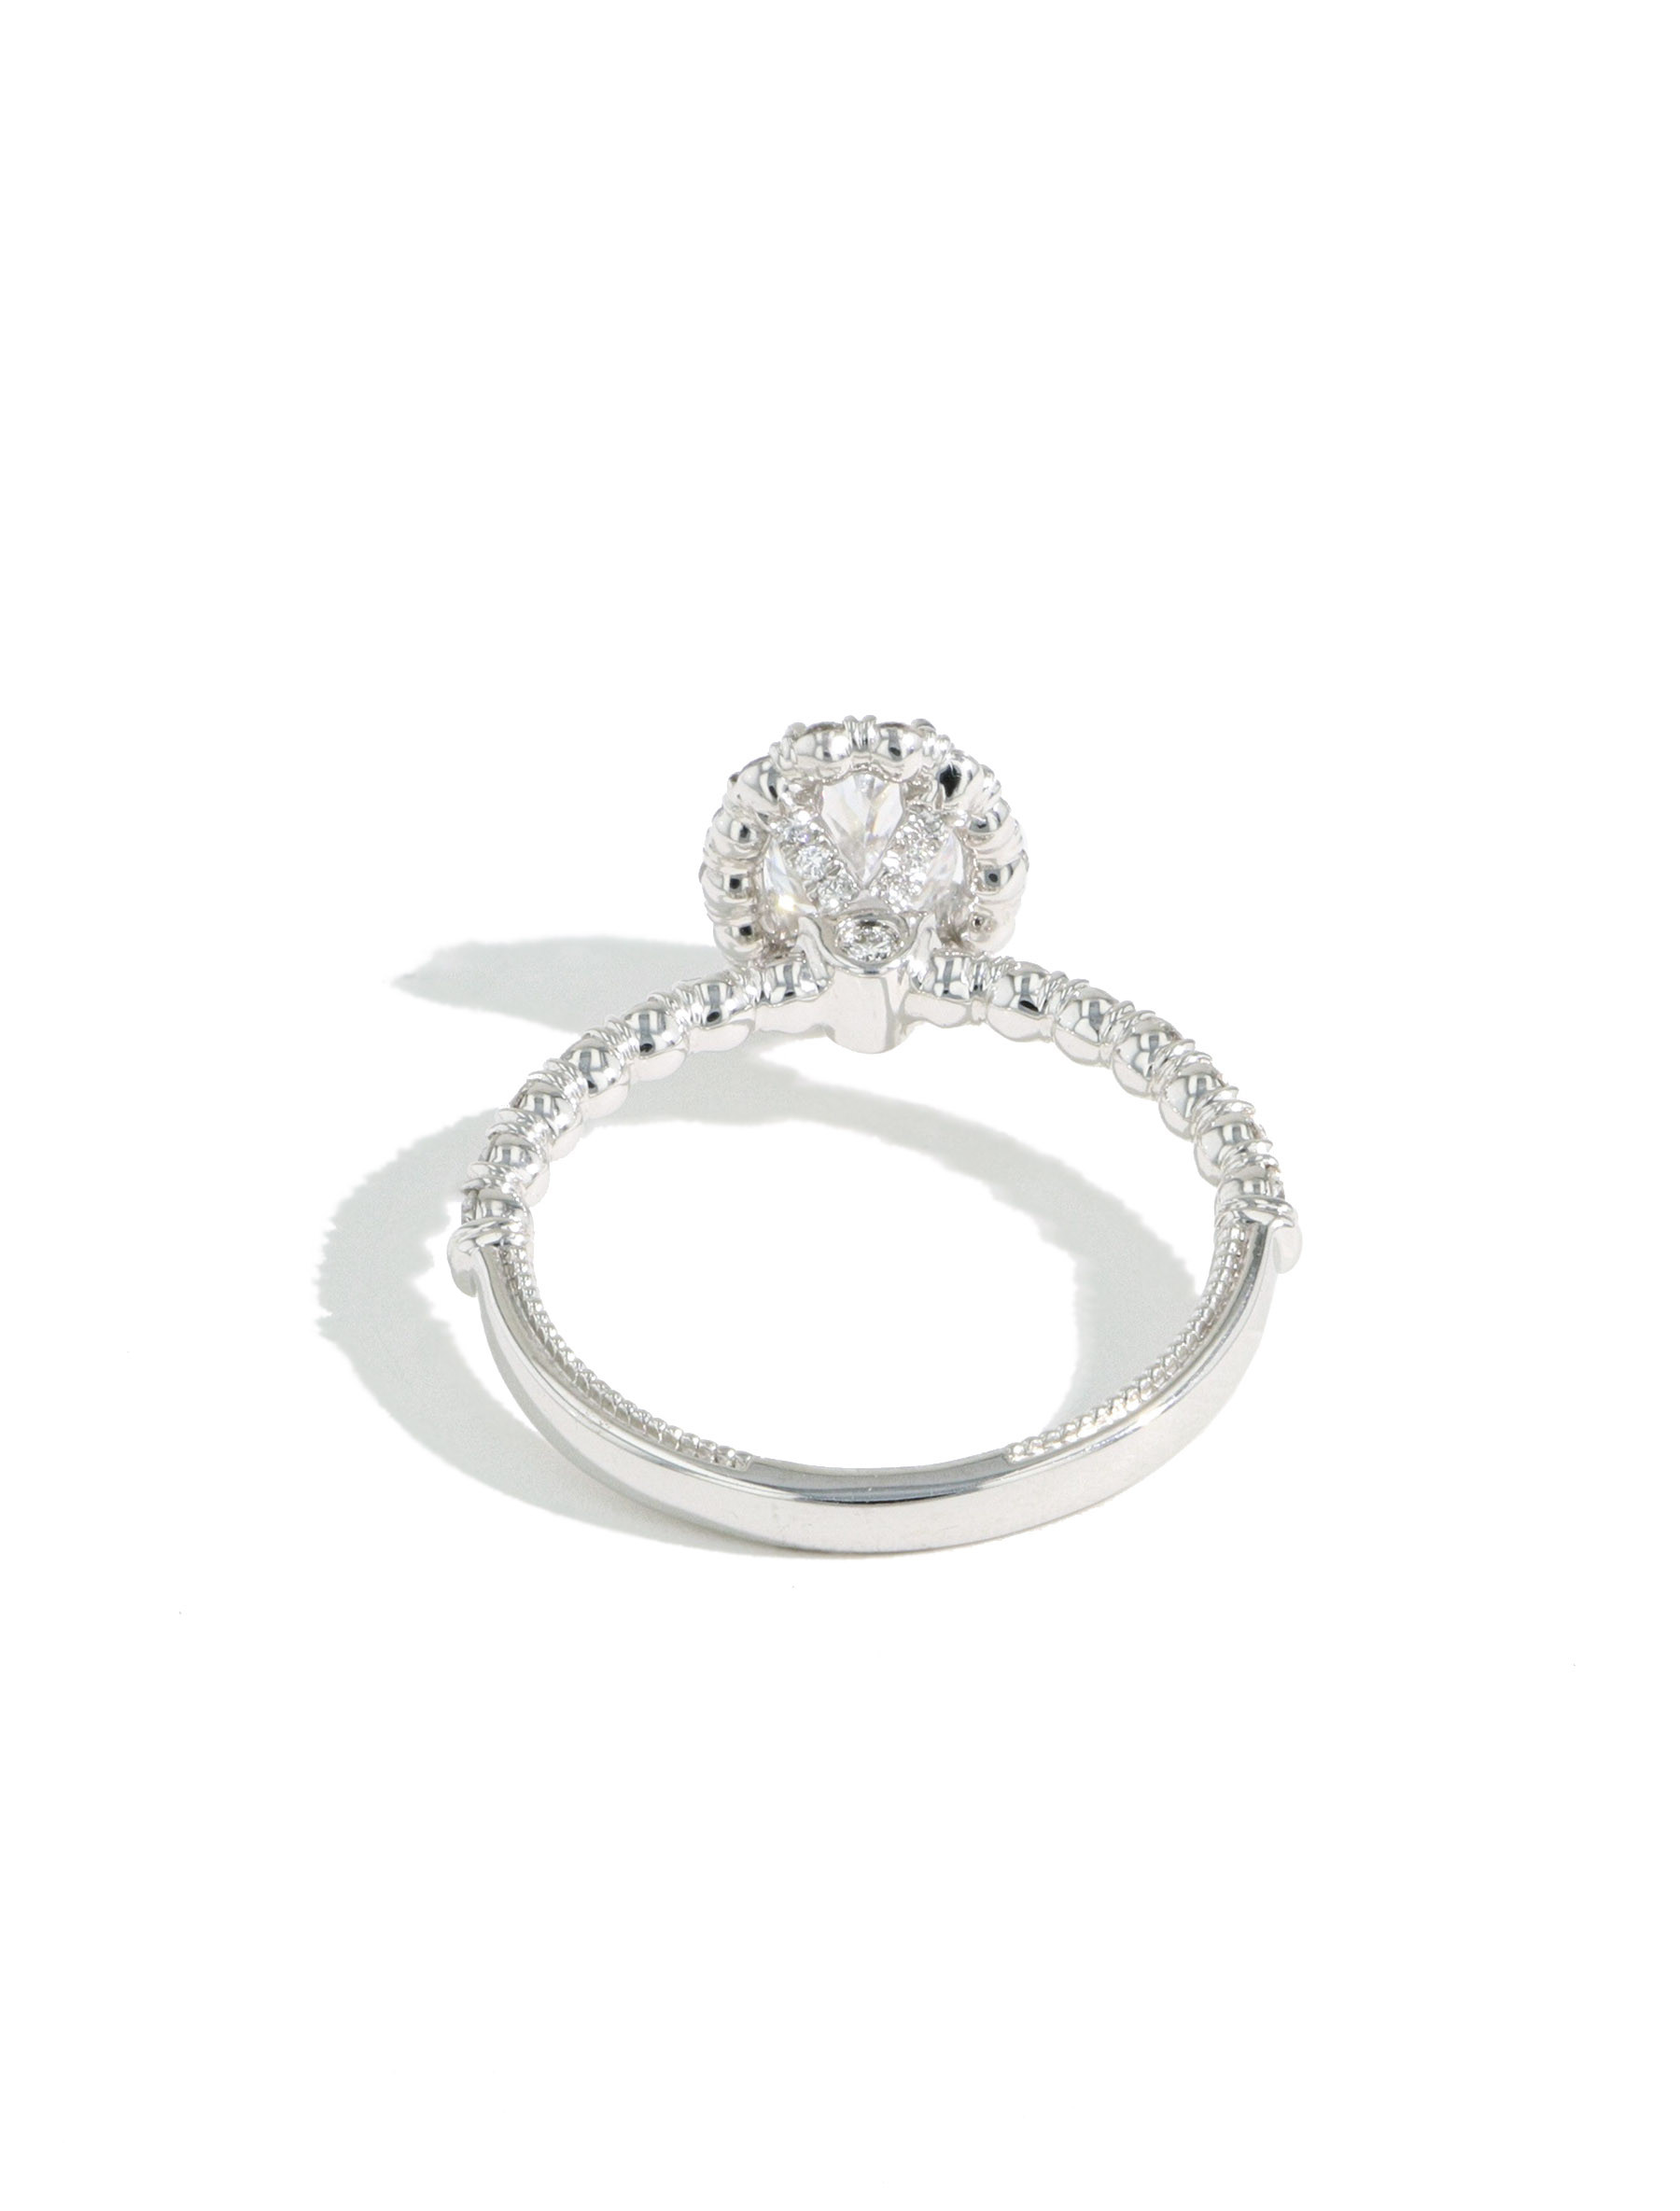 Verragio Classic Oval Halo Pave Engagement Ring Setting in White Gold back view